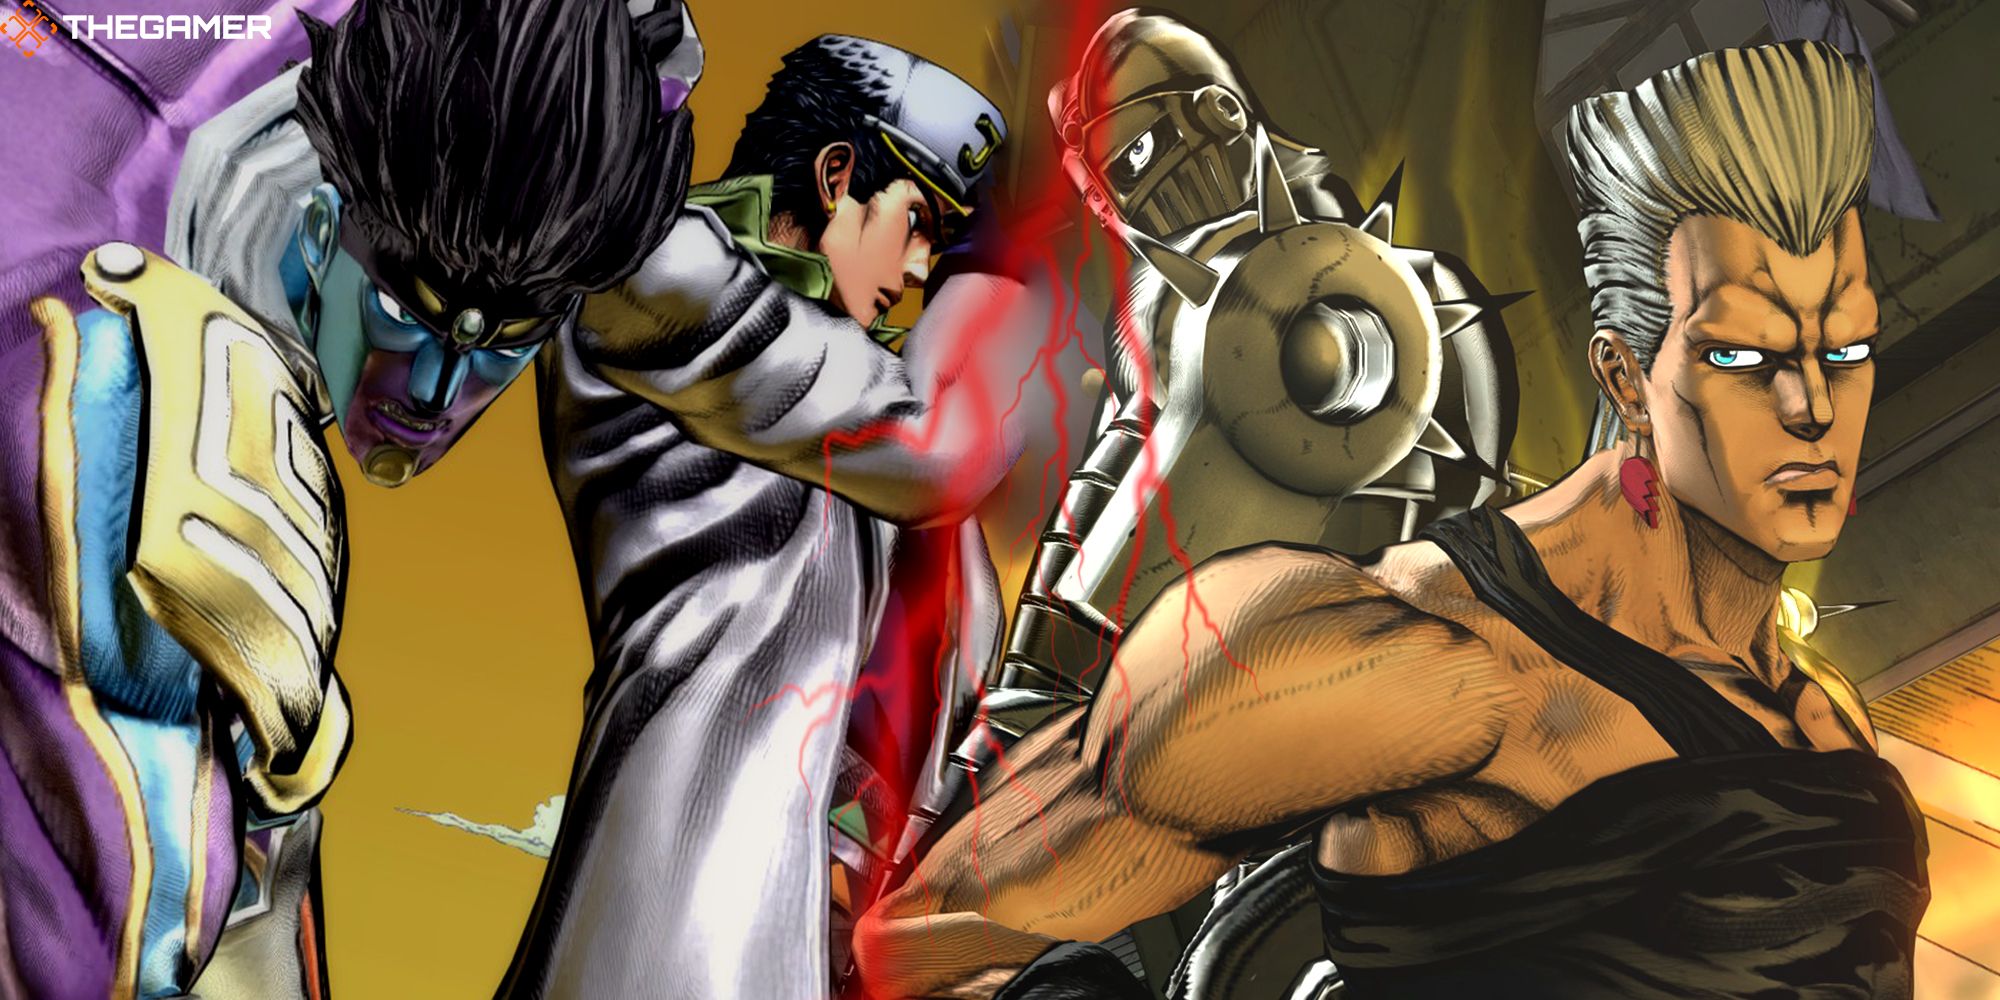 Jotaro Kujo, Jean Pierre, and their Stands, Star Platinum and Silver Chariot, separated by a red lightning bolt. Custom image for Jojo's Bizarre Adventure ASBR.